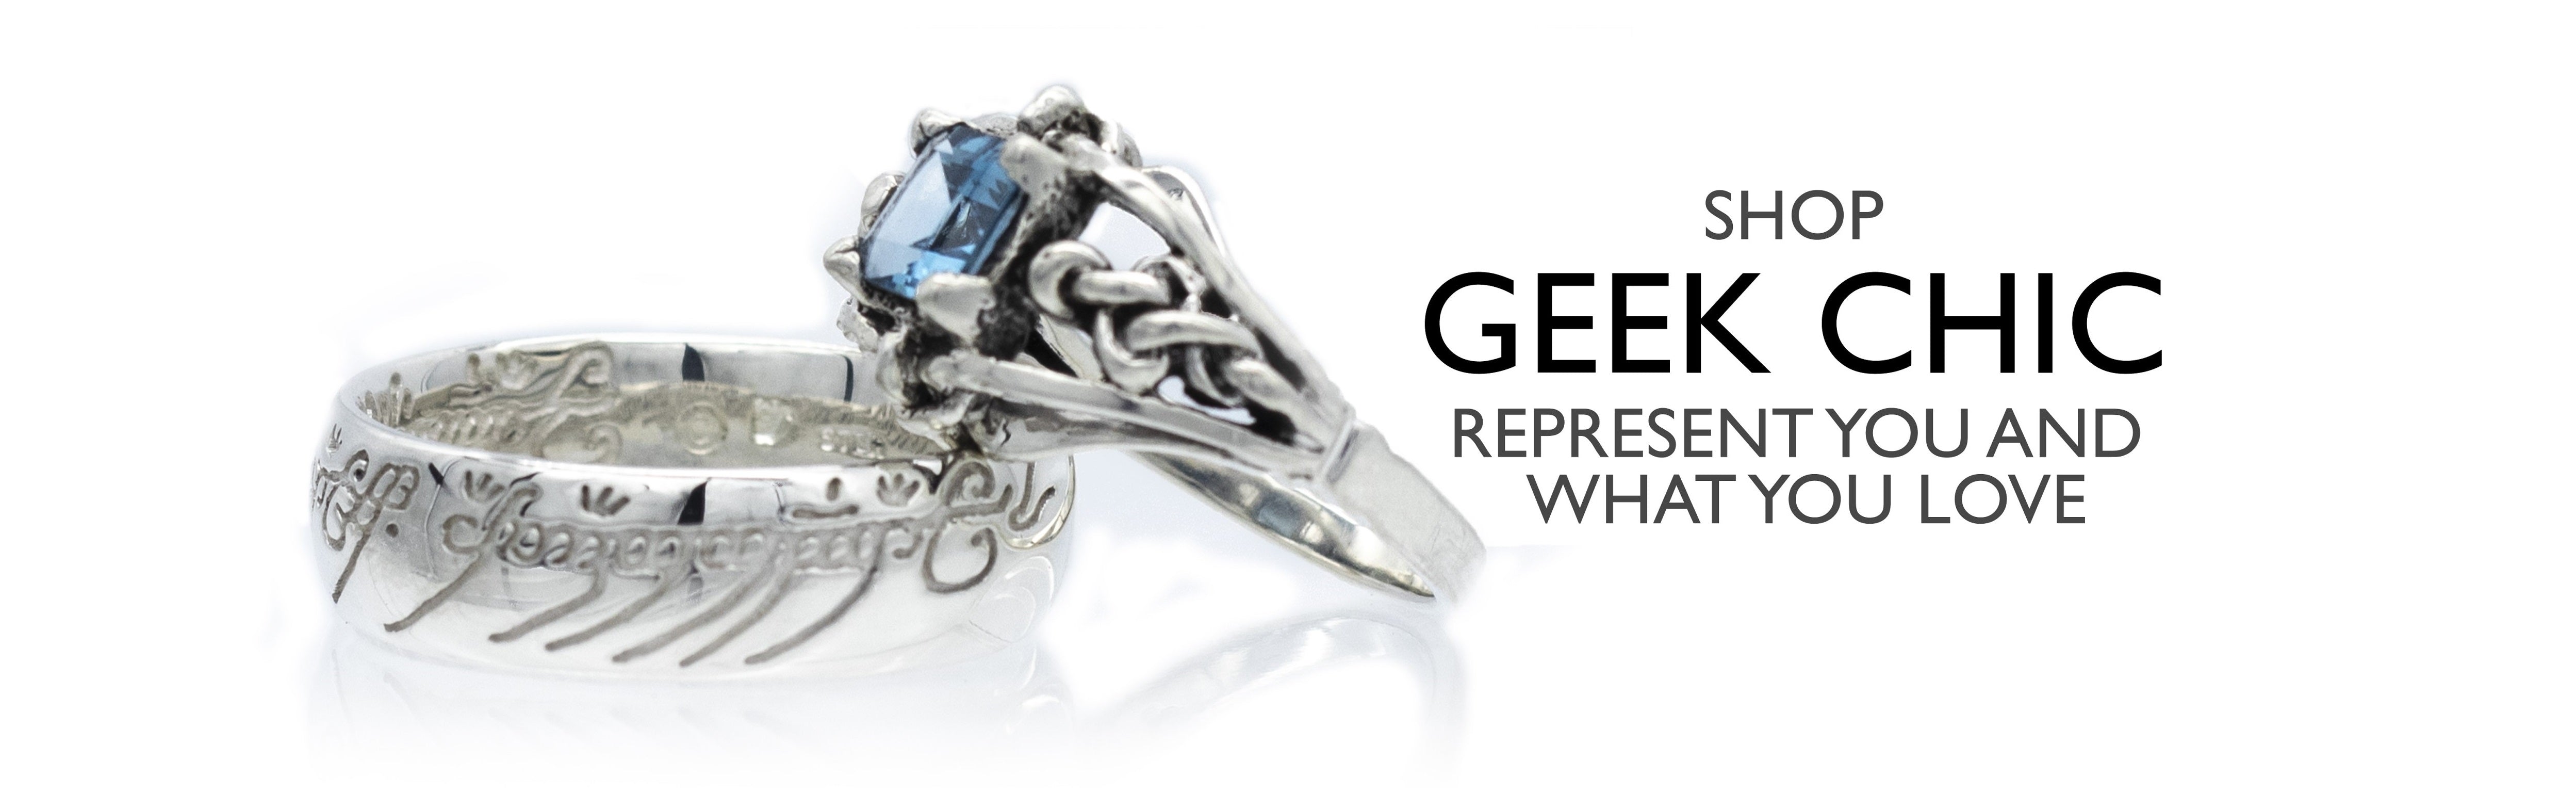 Geek Chic represent you and what you love